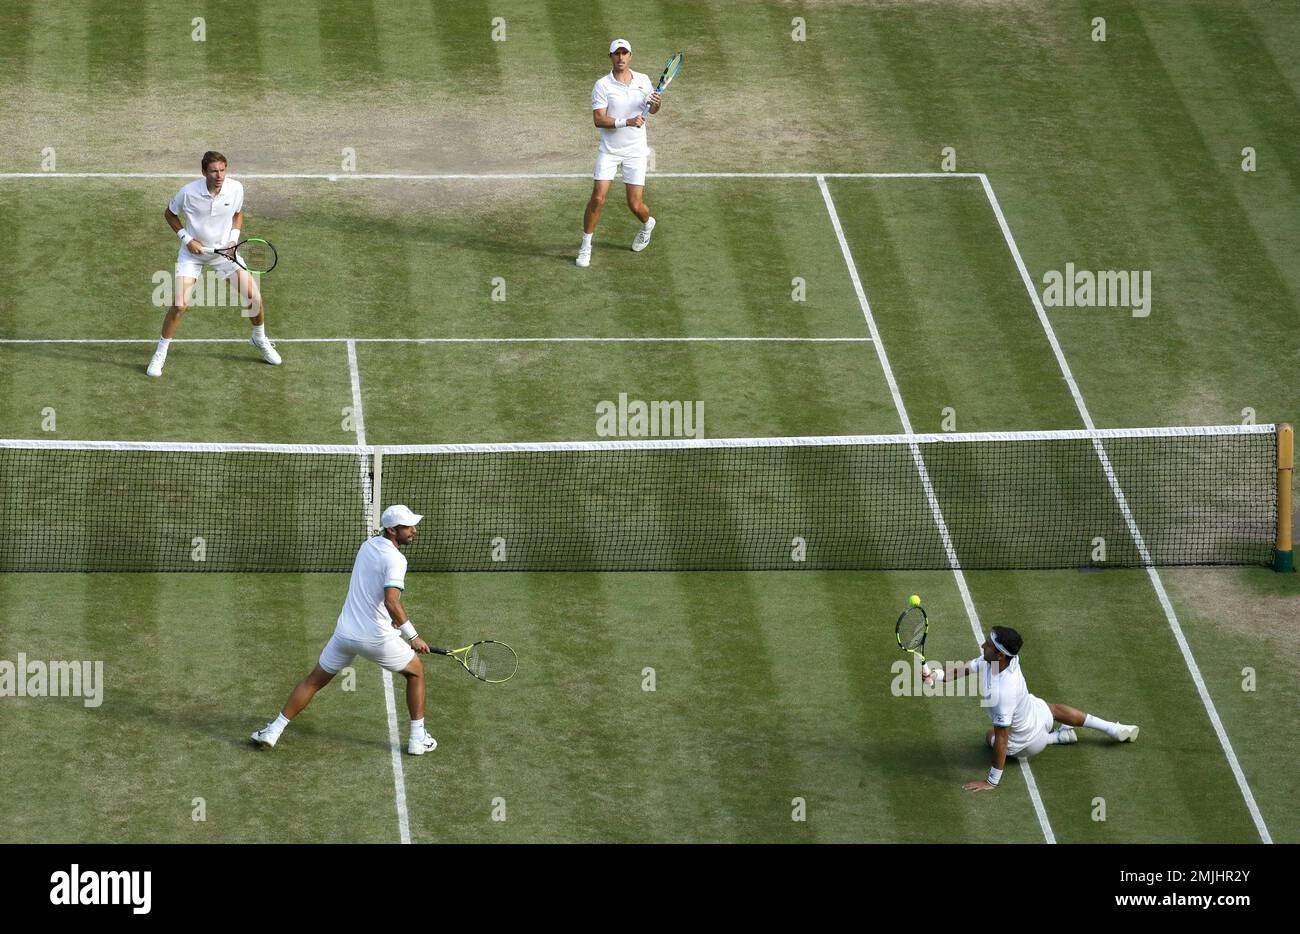 Colombias Juan Sebastian Cabal and Robert Farah, bottom, in action against Frances Nicolas Mahut and Edouard Roger-Vasselin during the mens doubles final match on day twelve of the Wimbledon Tennis Championships in